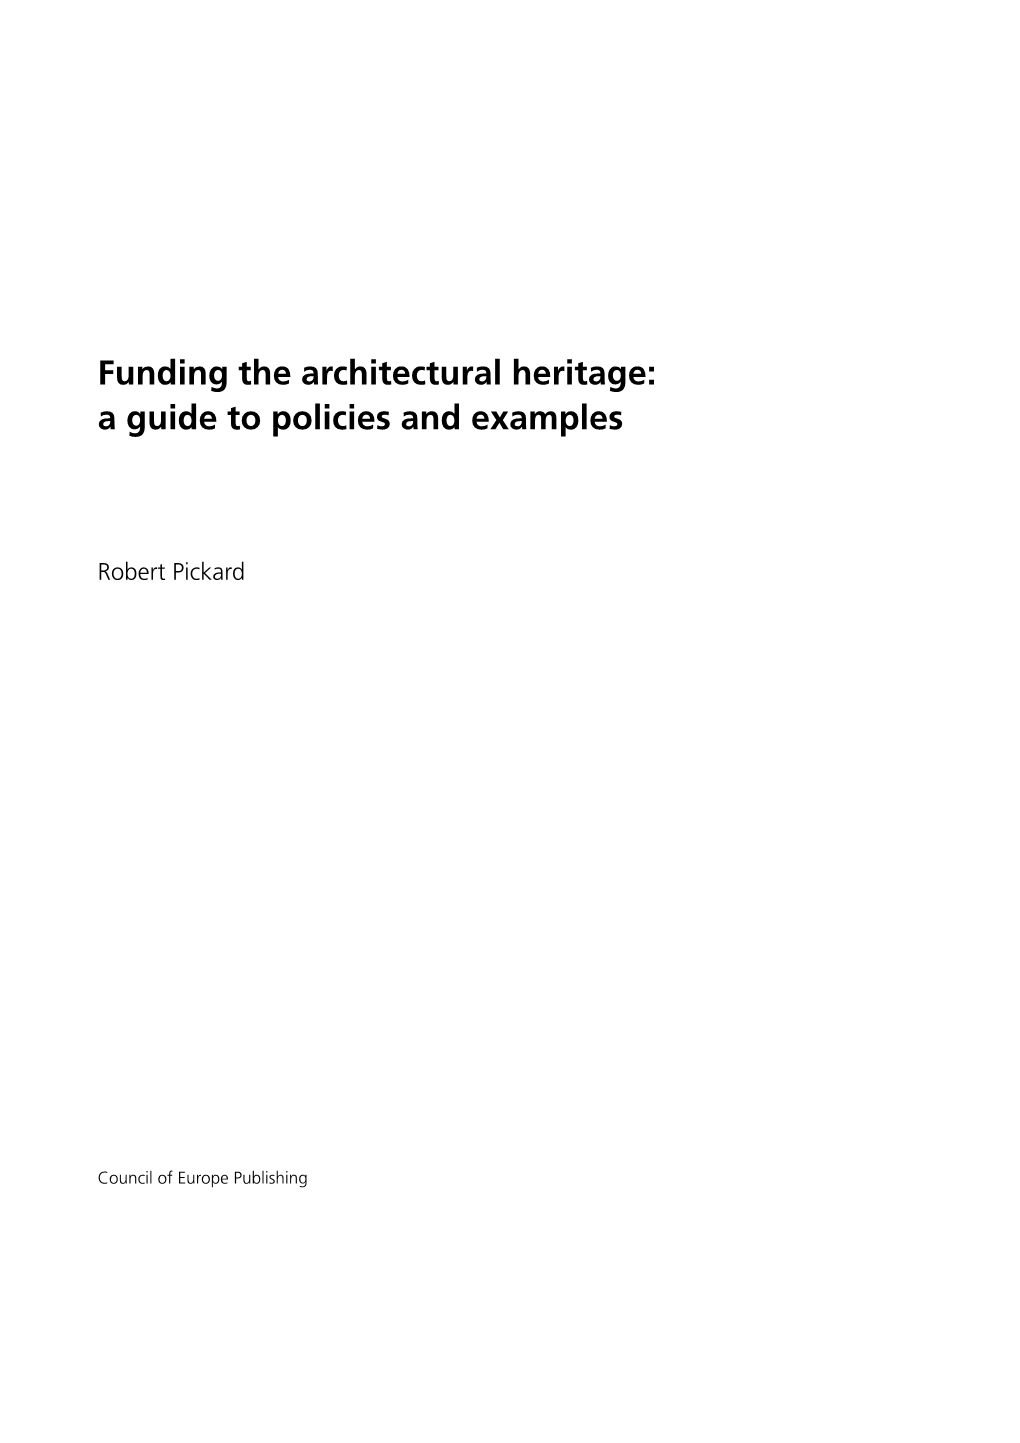 Funding the Architectural Heritage: a Guide to Policies and Examples